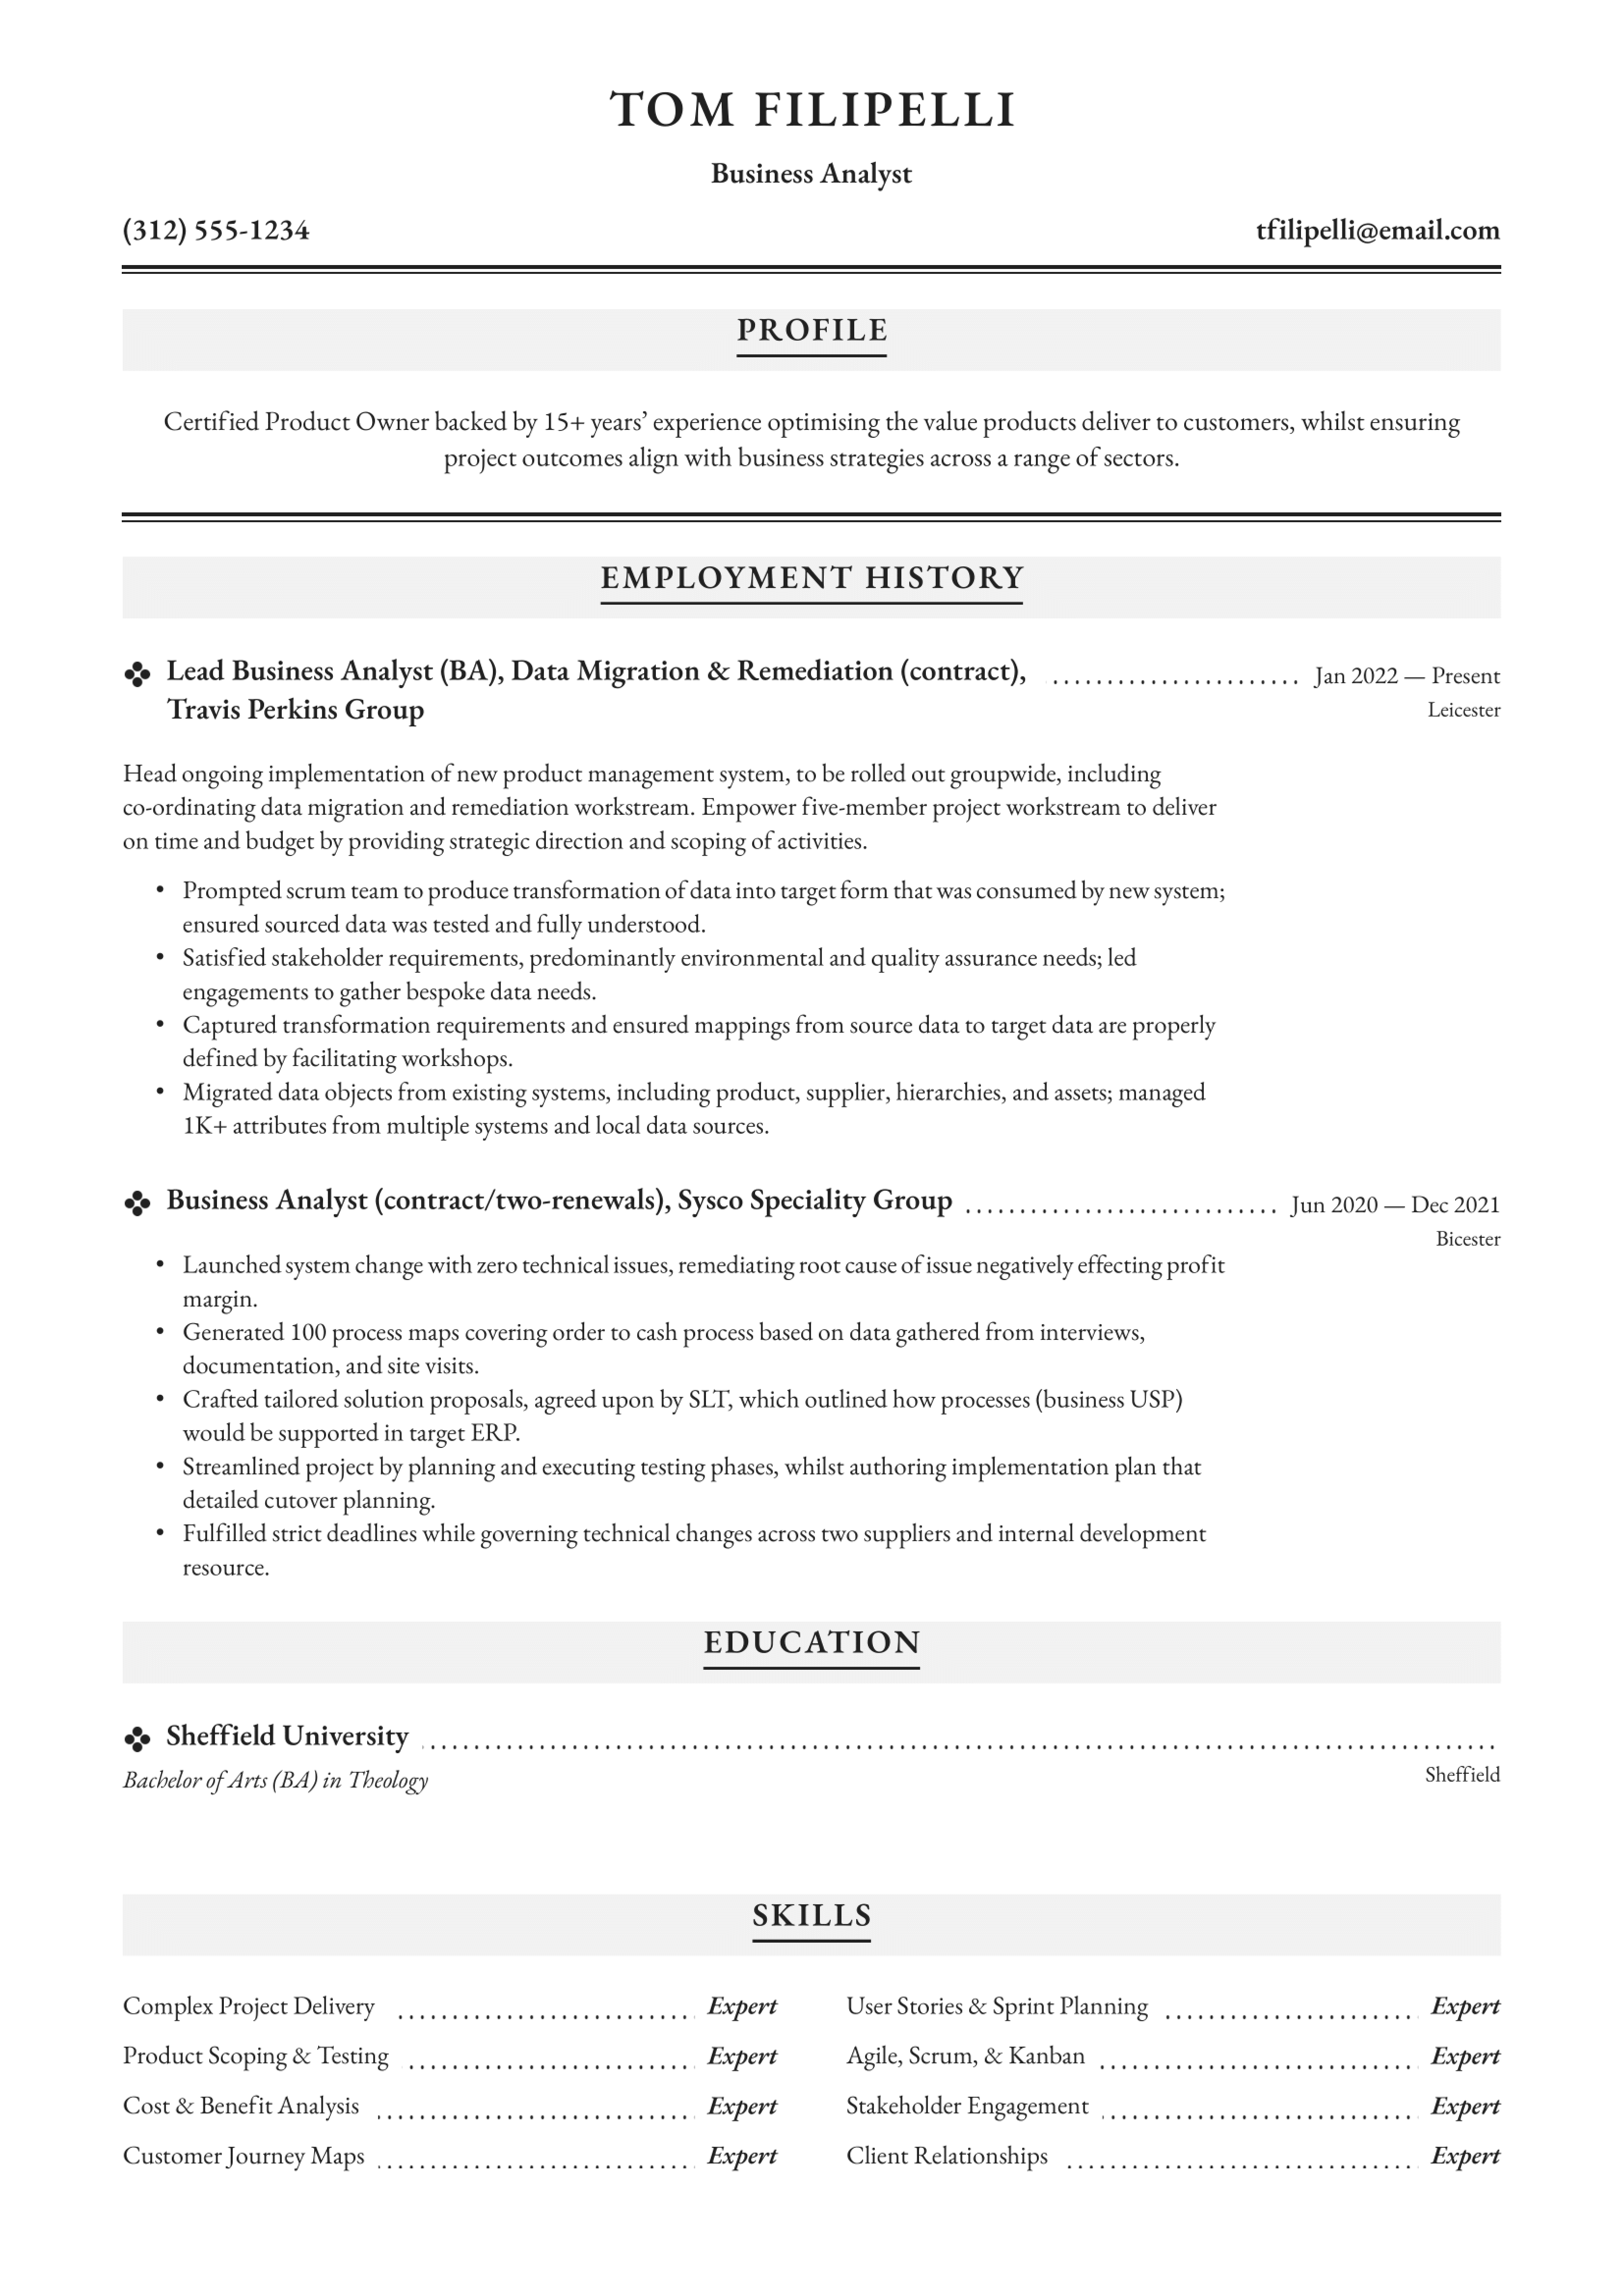 Business Analyst Resume Example